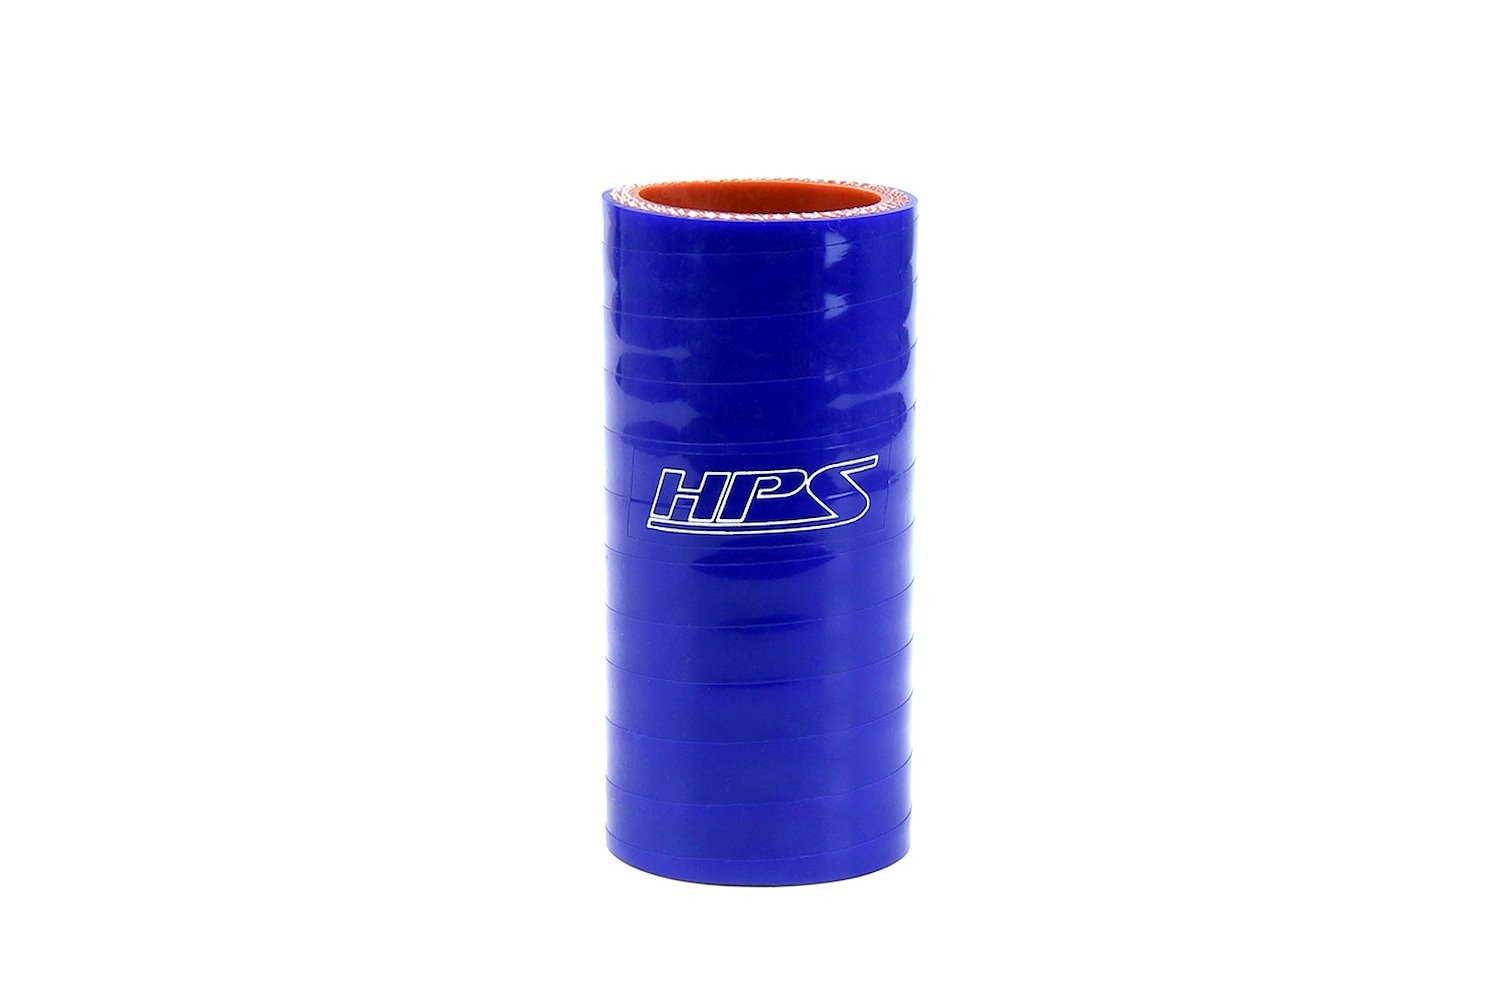 HTSC-162-BLUE Silicone Coupler Hose, High-Temp 4-Ply Reinforced, 1-5/8 in. ID, 3 in. Long, Blue